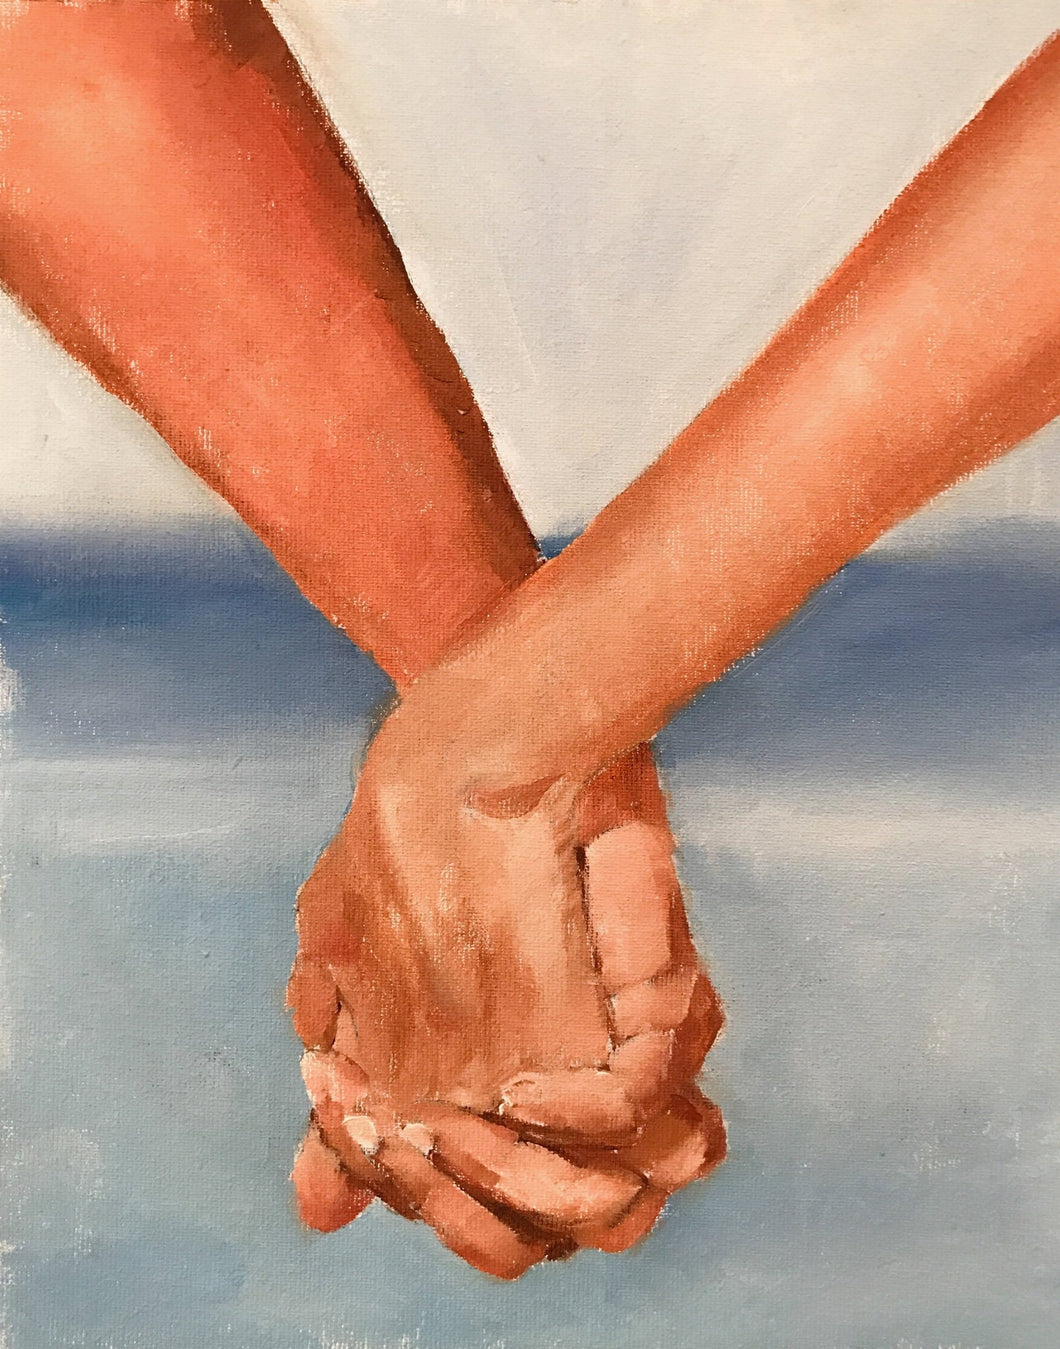 Holding hands Painting, love Wall art, Canvas Print, Fine Art - from original oil painting by James Coates